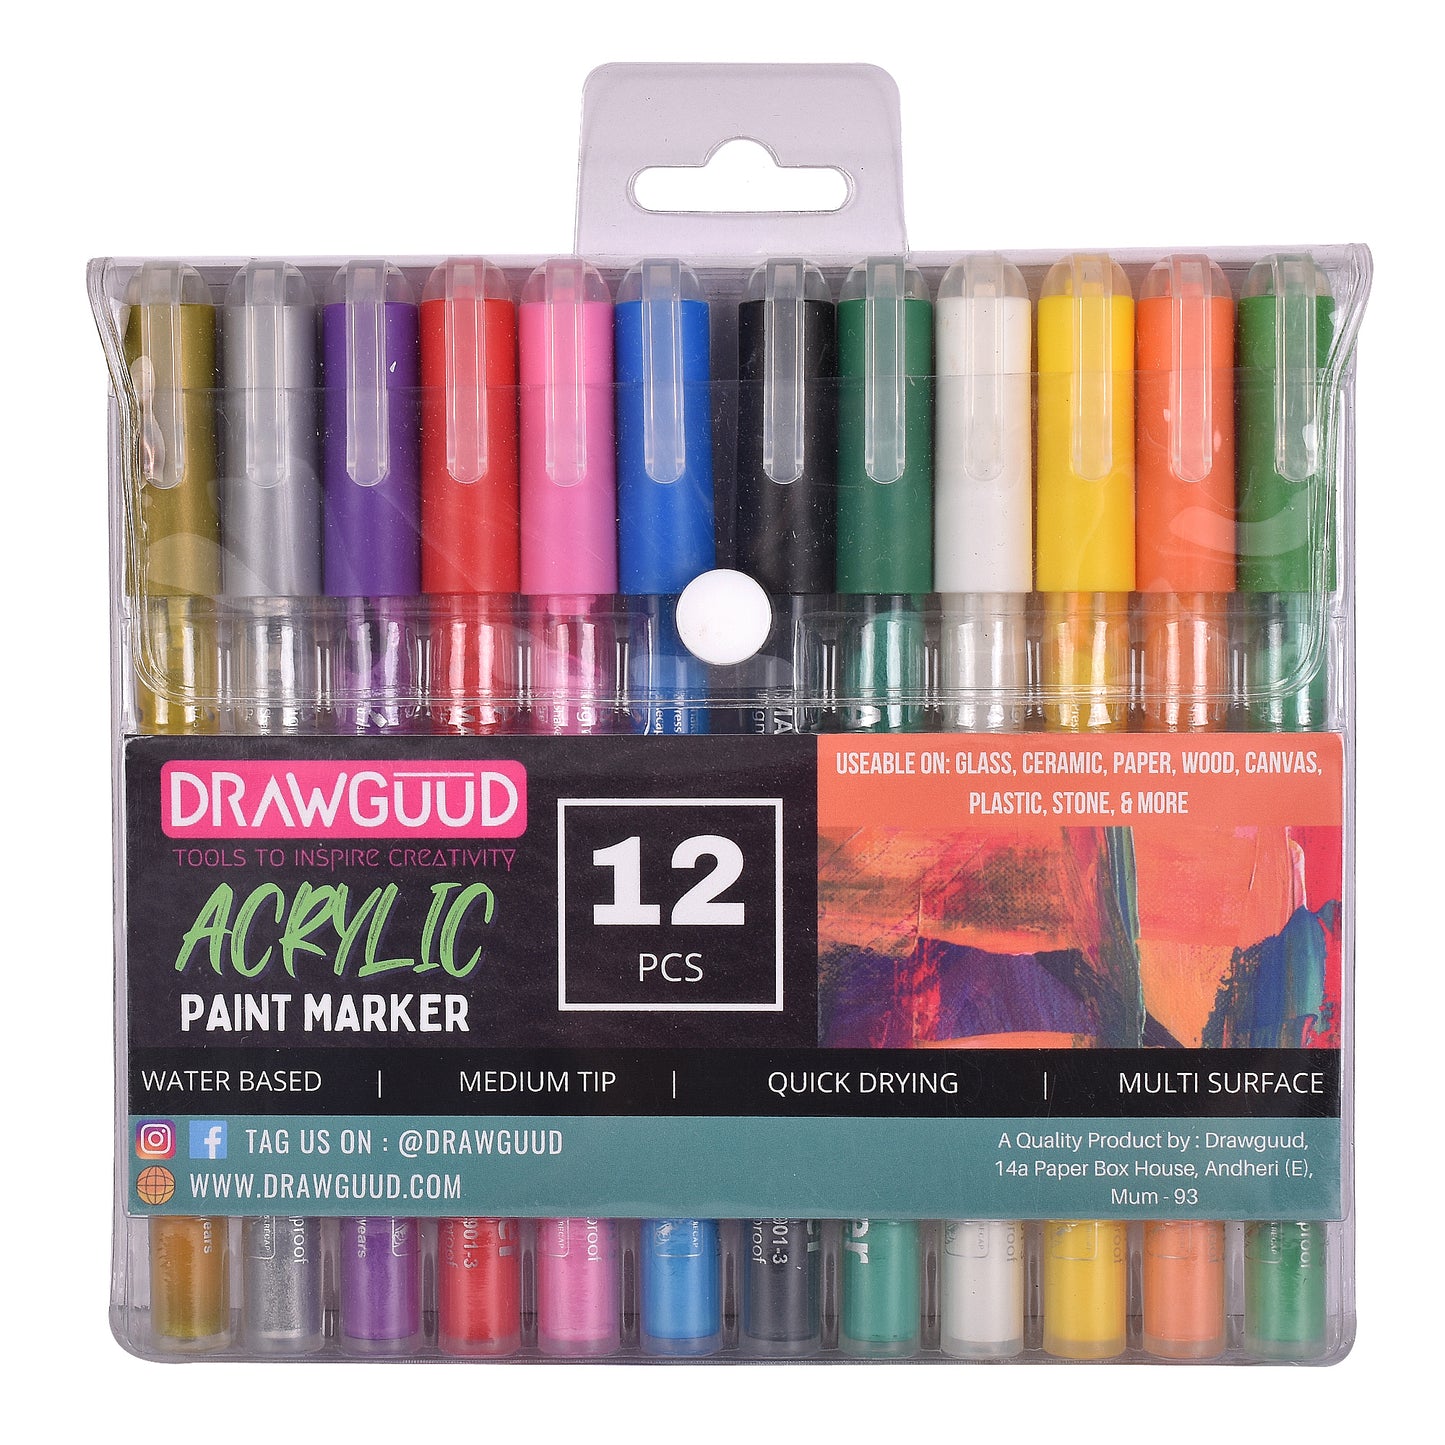 Wholesale Acrylic Paint Refillable Markers For Advertising, Art, And  Drawing On Wood, Canvas, Stone, Glass, Ceramic Surfaces From Home_office,  $0.26